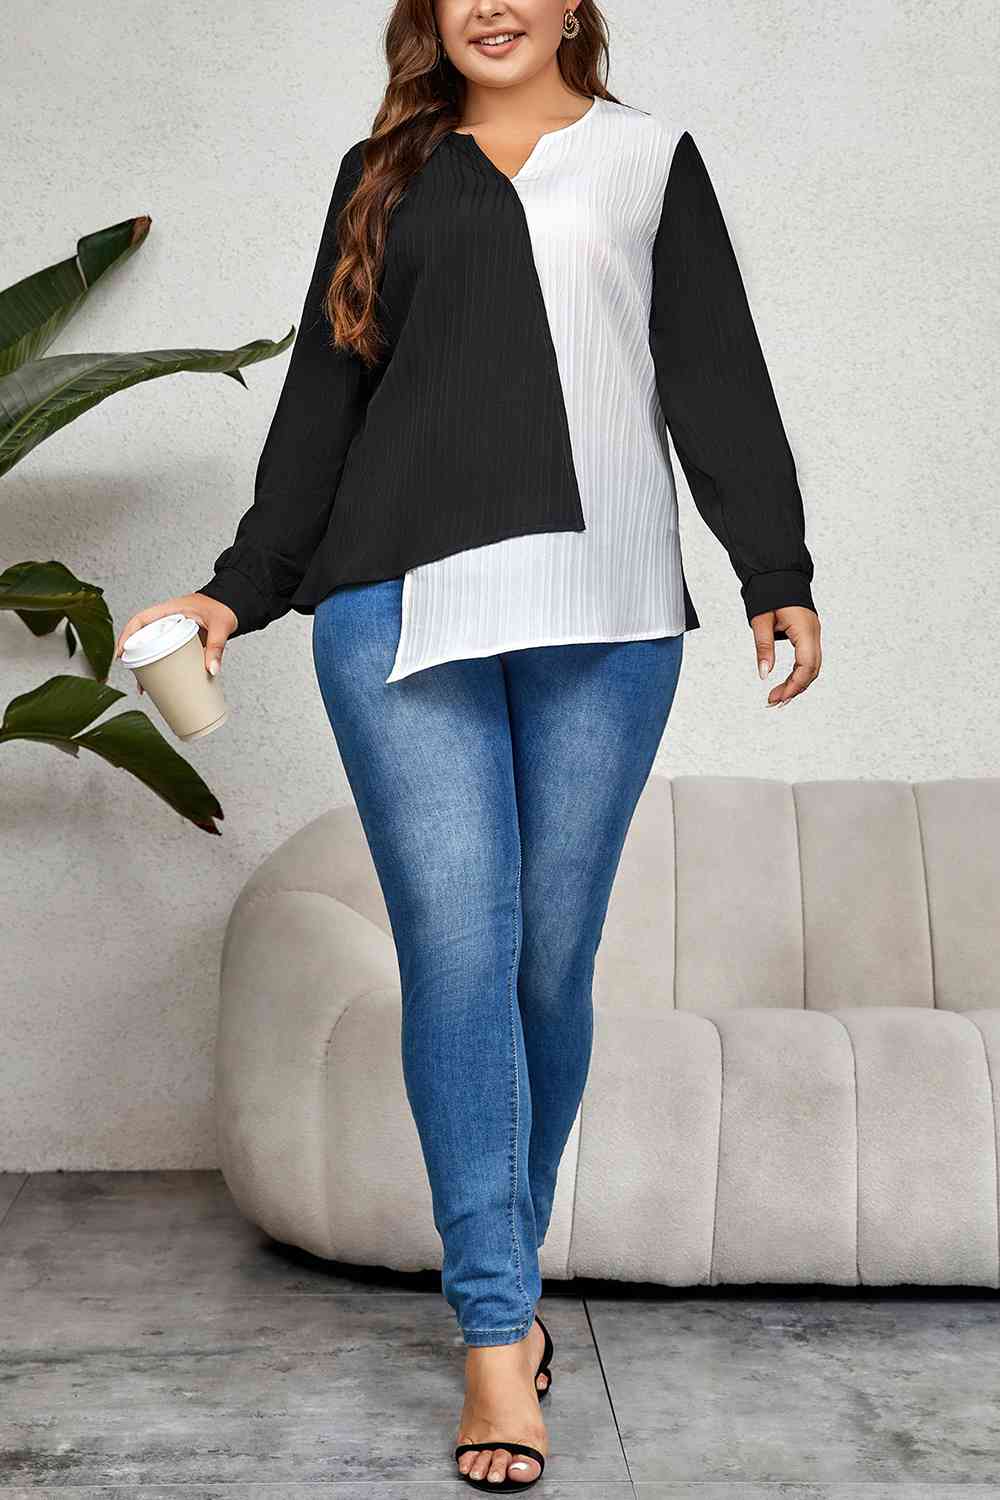 Plus Size Contrast Asymmetrical Long Sleeve Top - Just Enuff Sexy